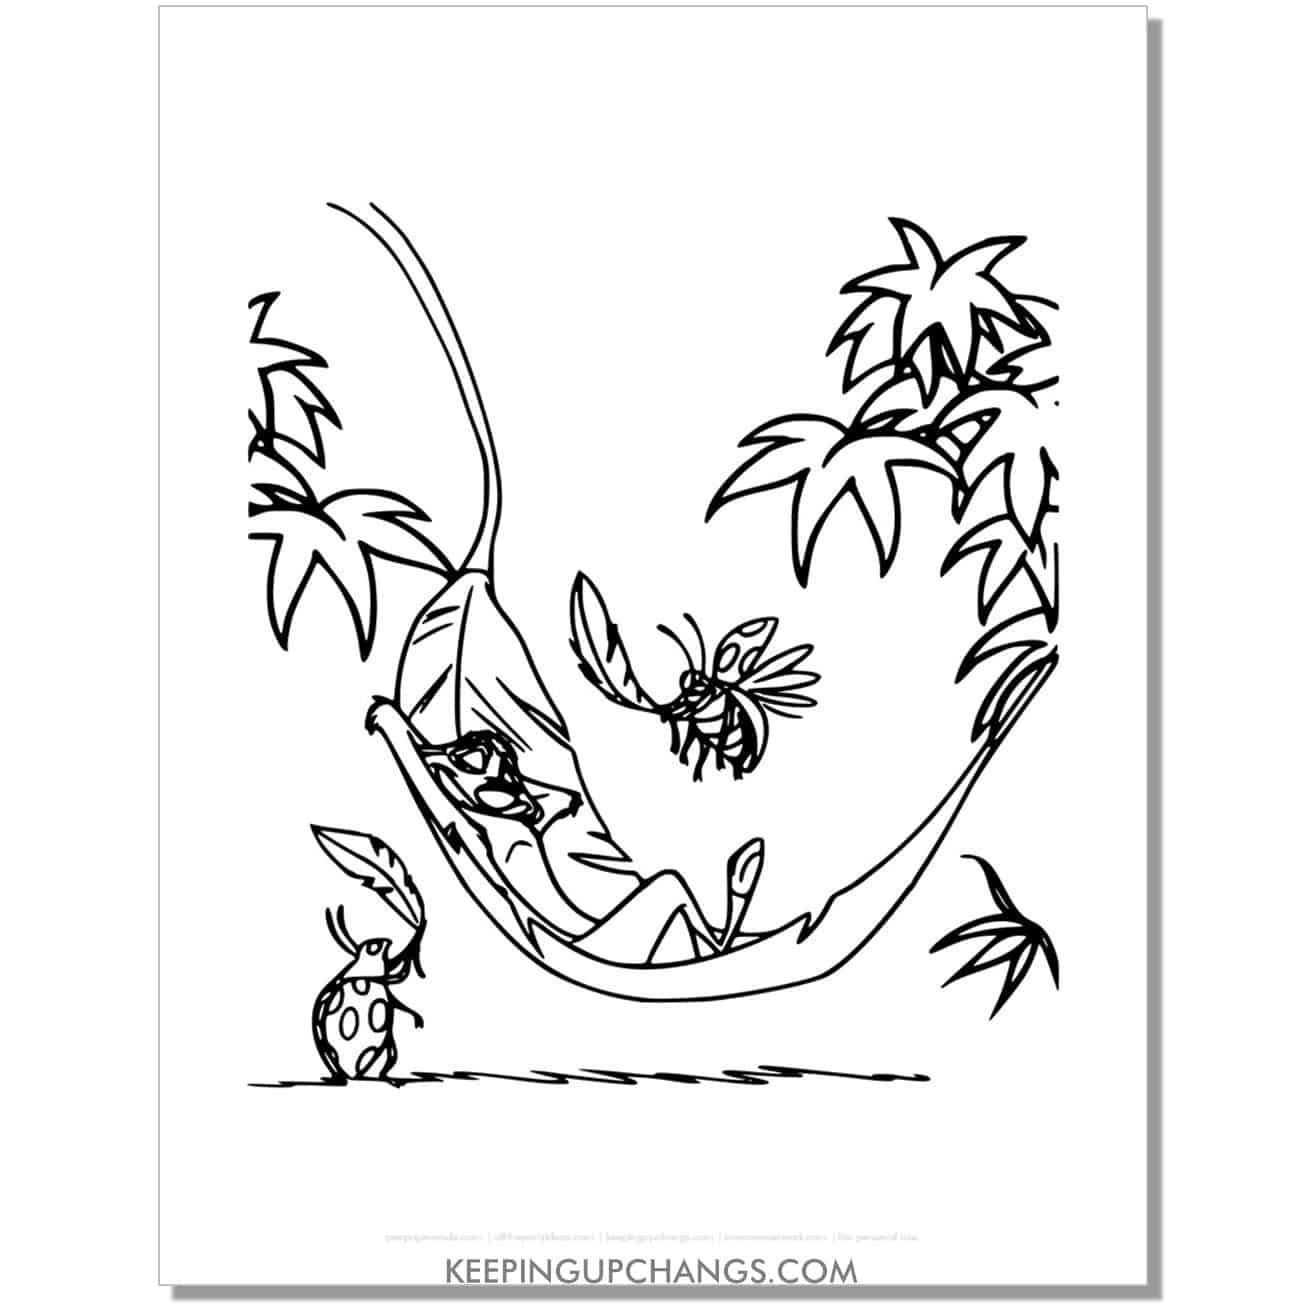 timon laying in leaf like hammock lion king coloring page, sheet.